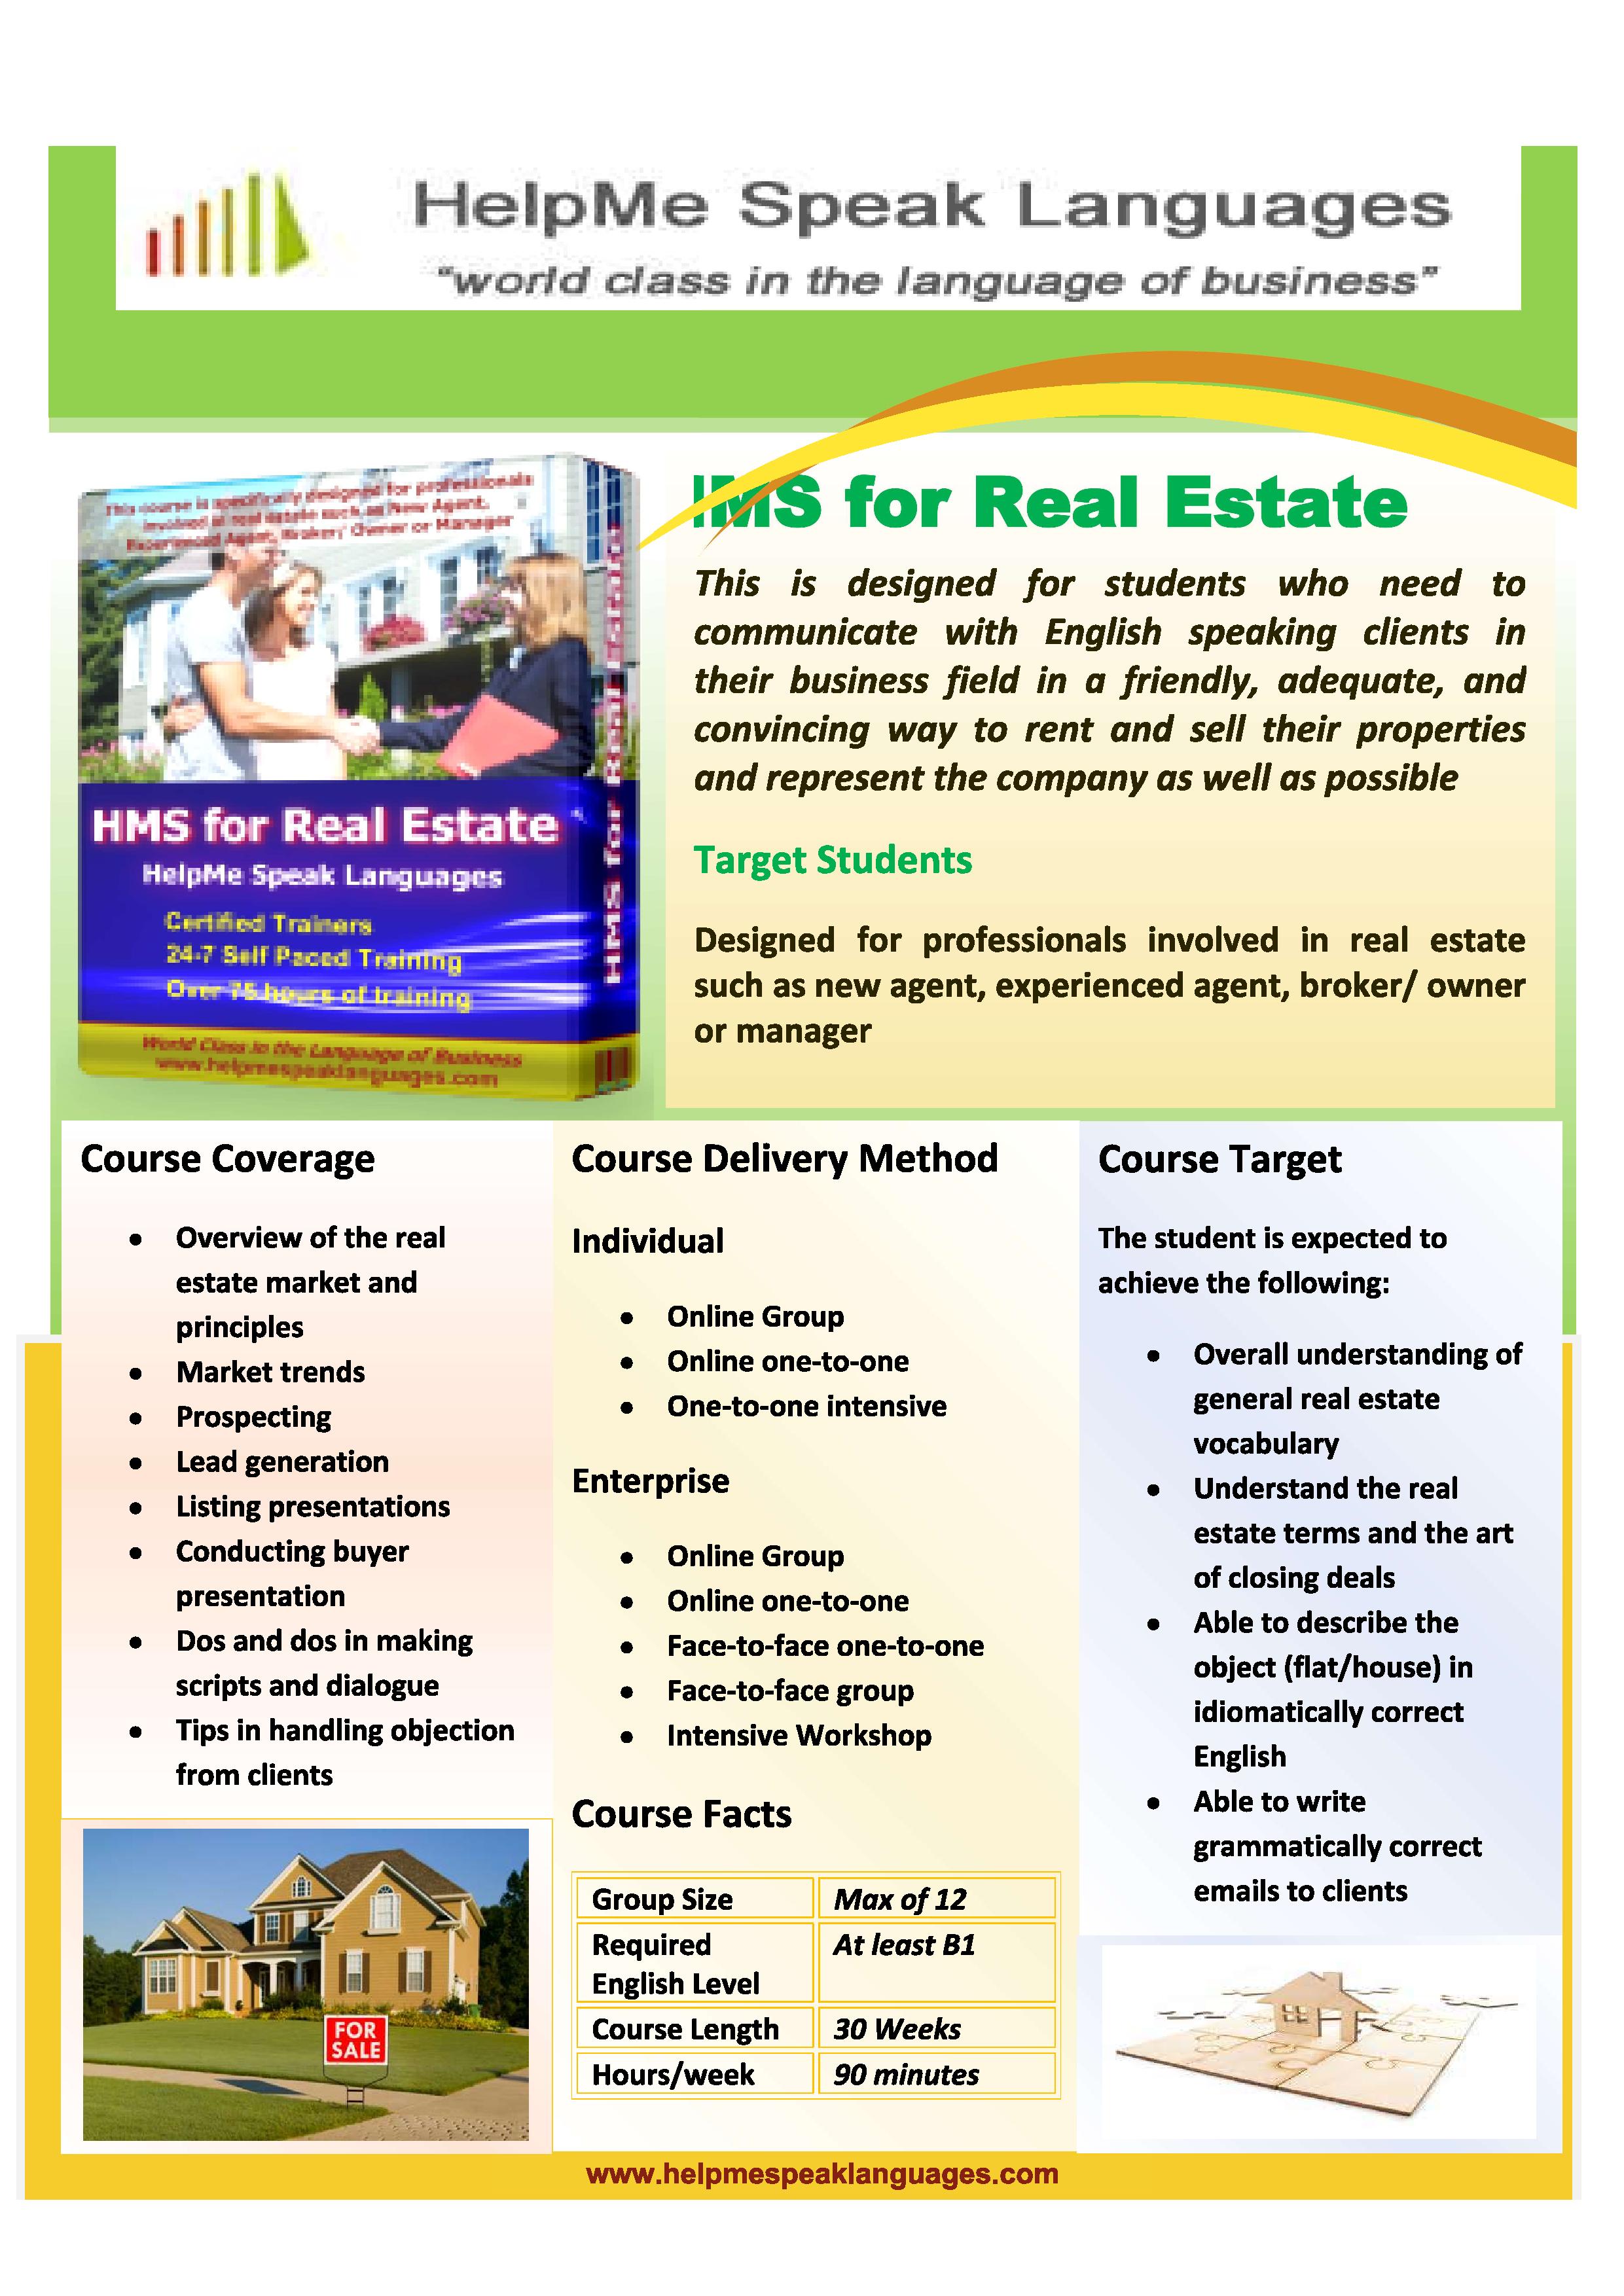 hms-for-real-estate-page-001